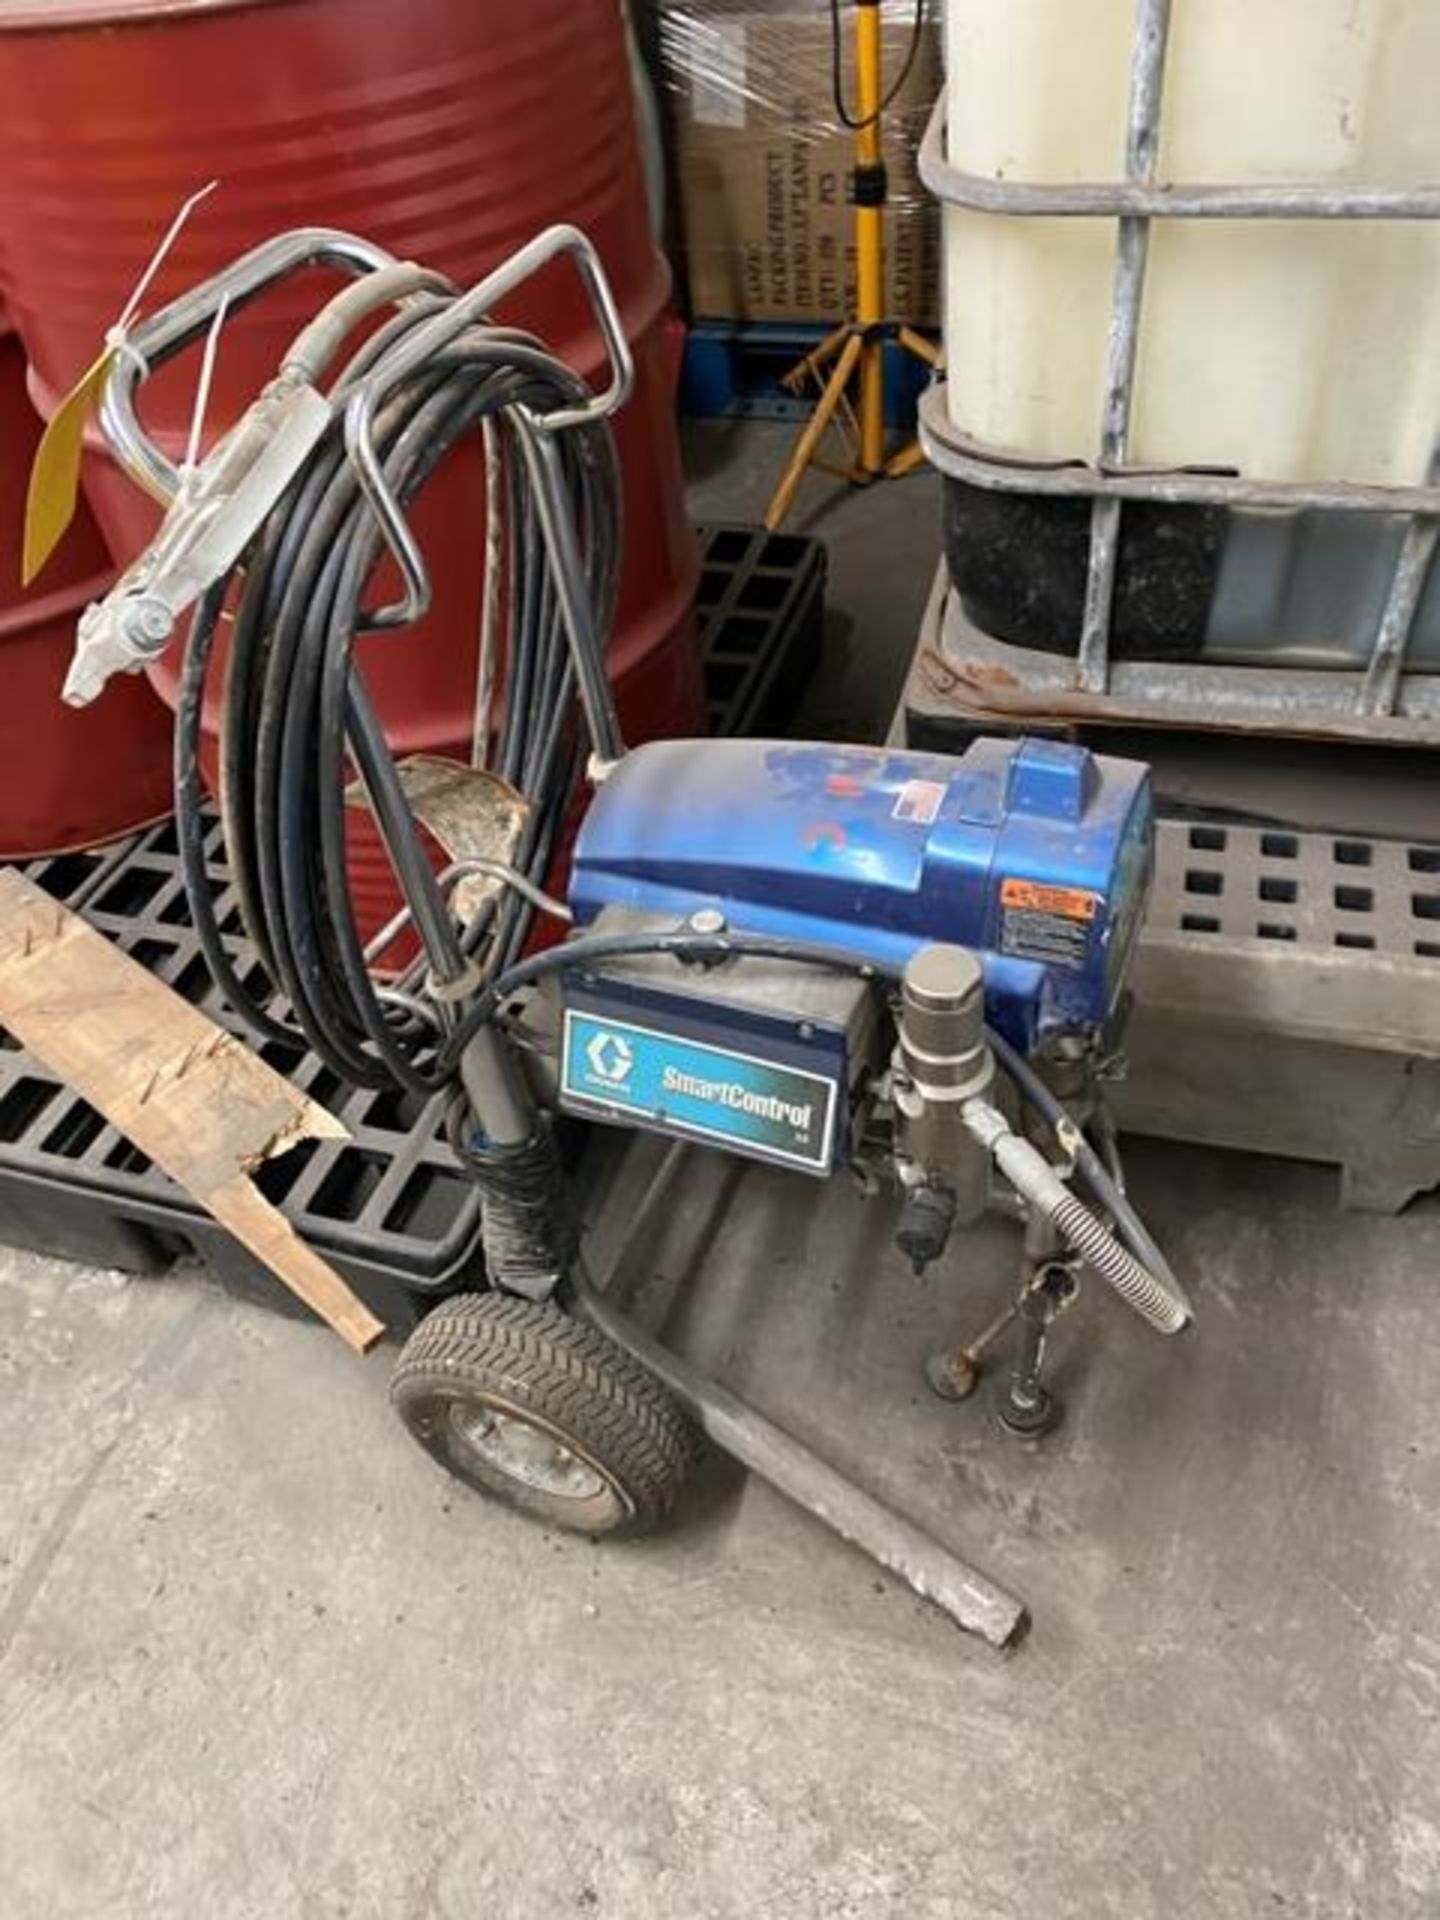 Graco Magnum Pro X9 Airless Paint Sprayer Rigging Price $25 - Image 2 of 2